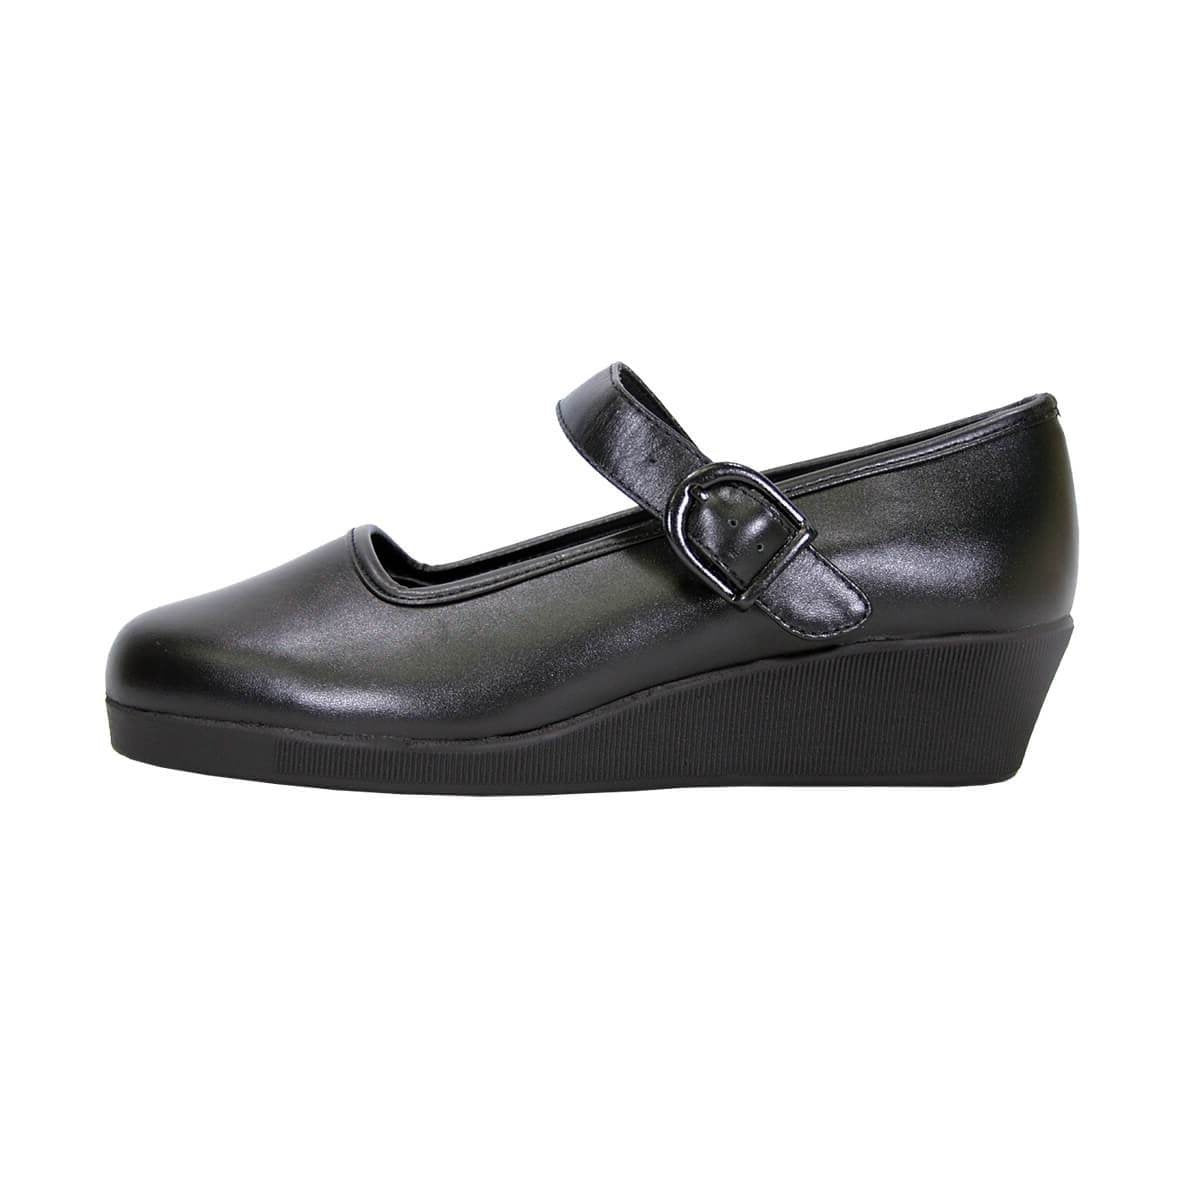 24 HOUR COMFORT Justine Women's Wide Width Leather Wedge Shoes